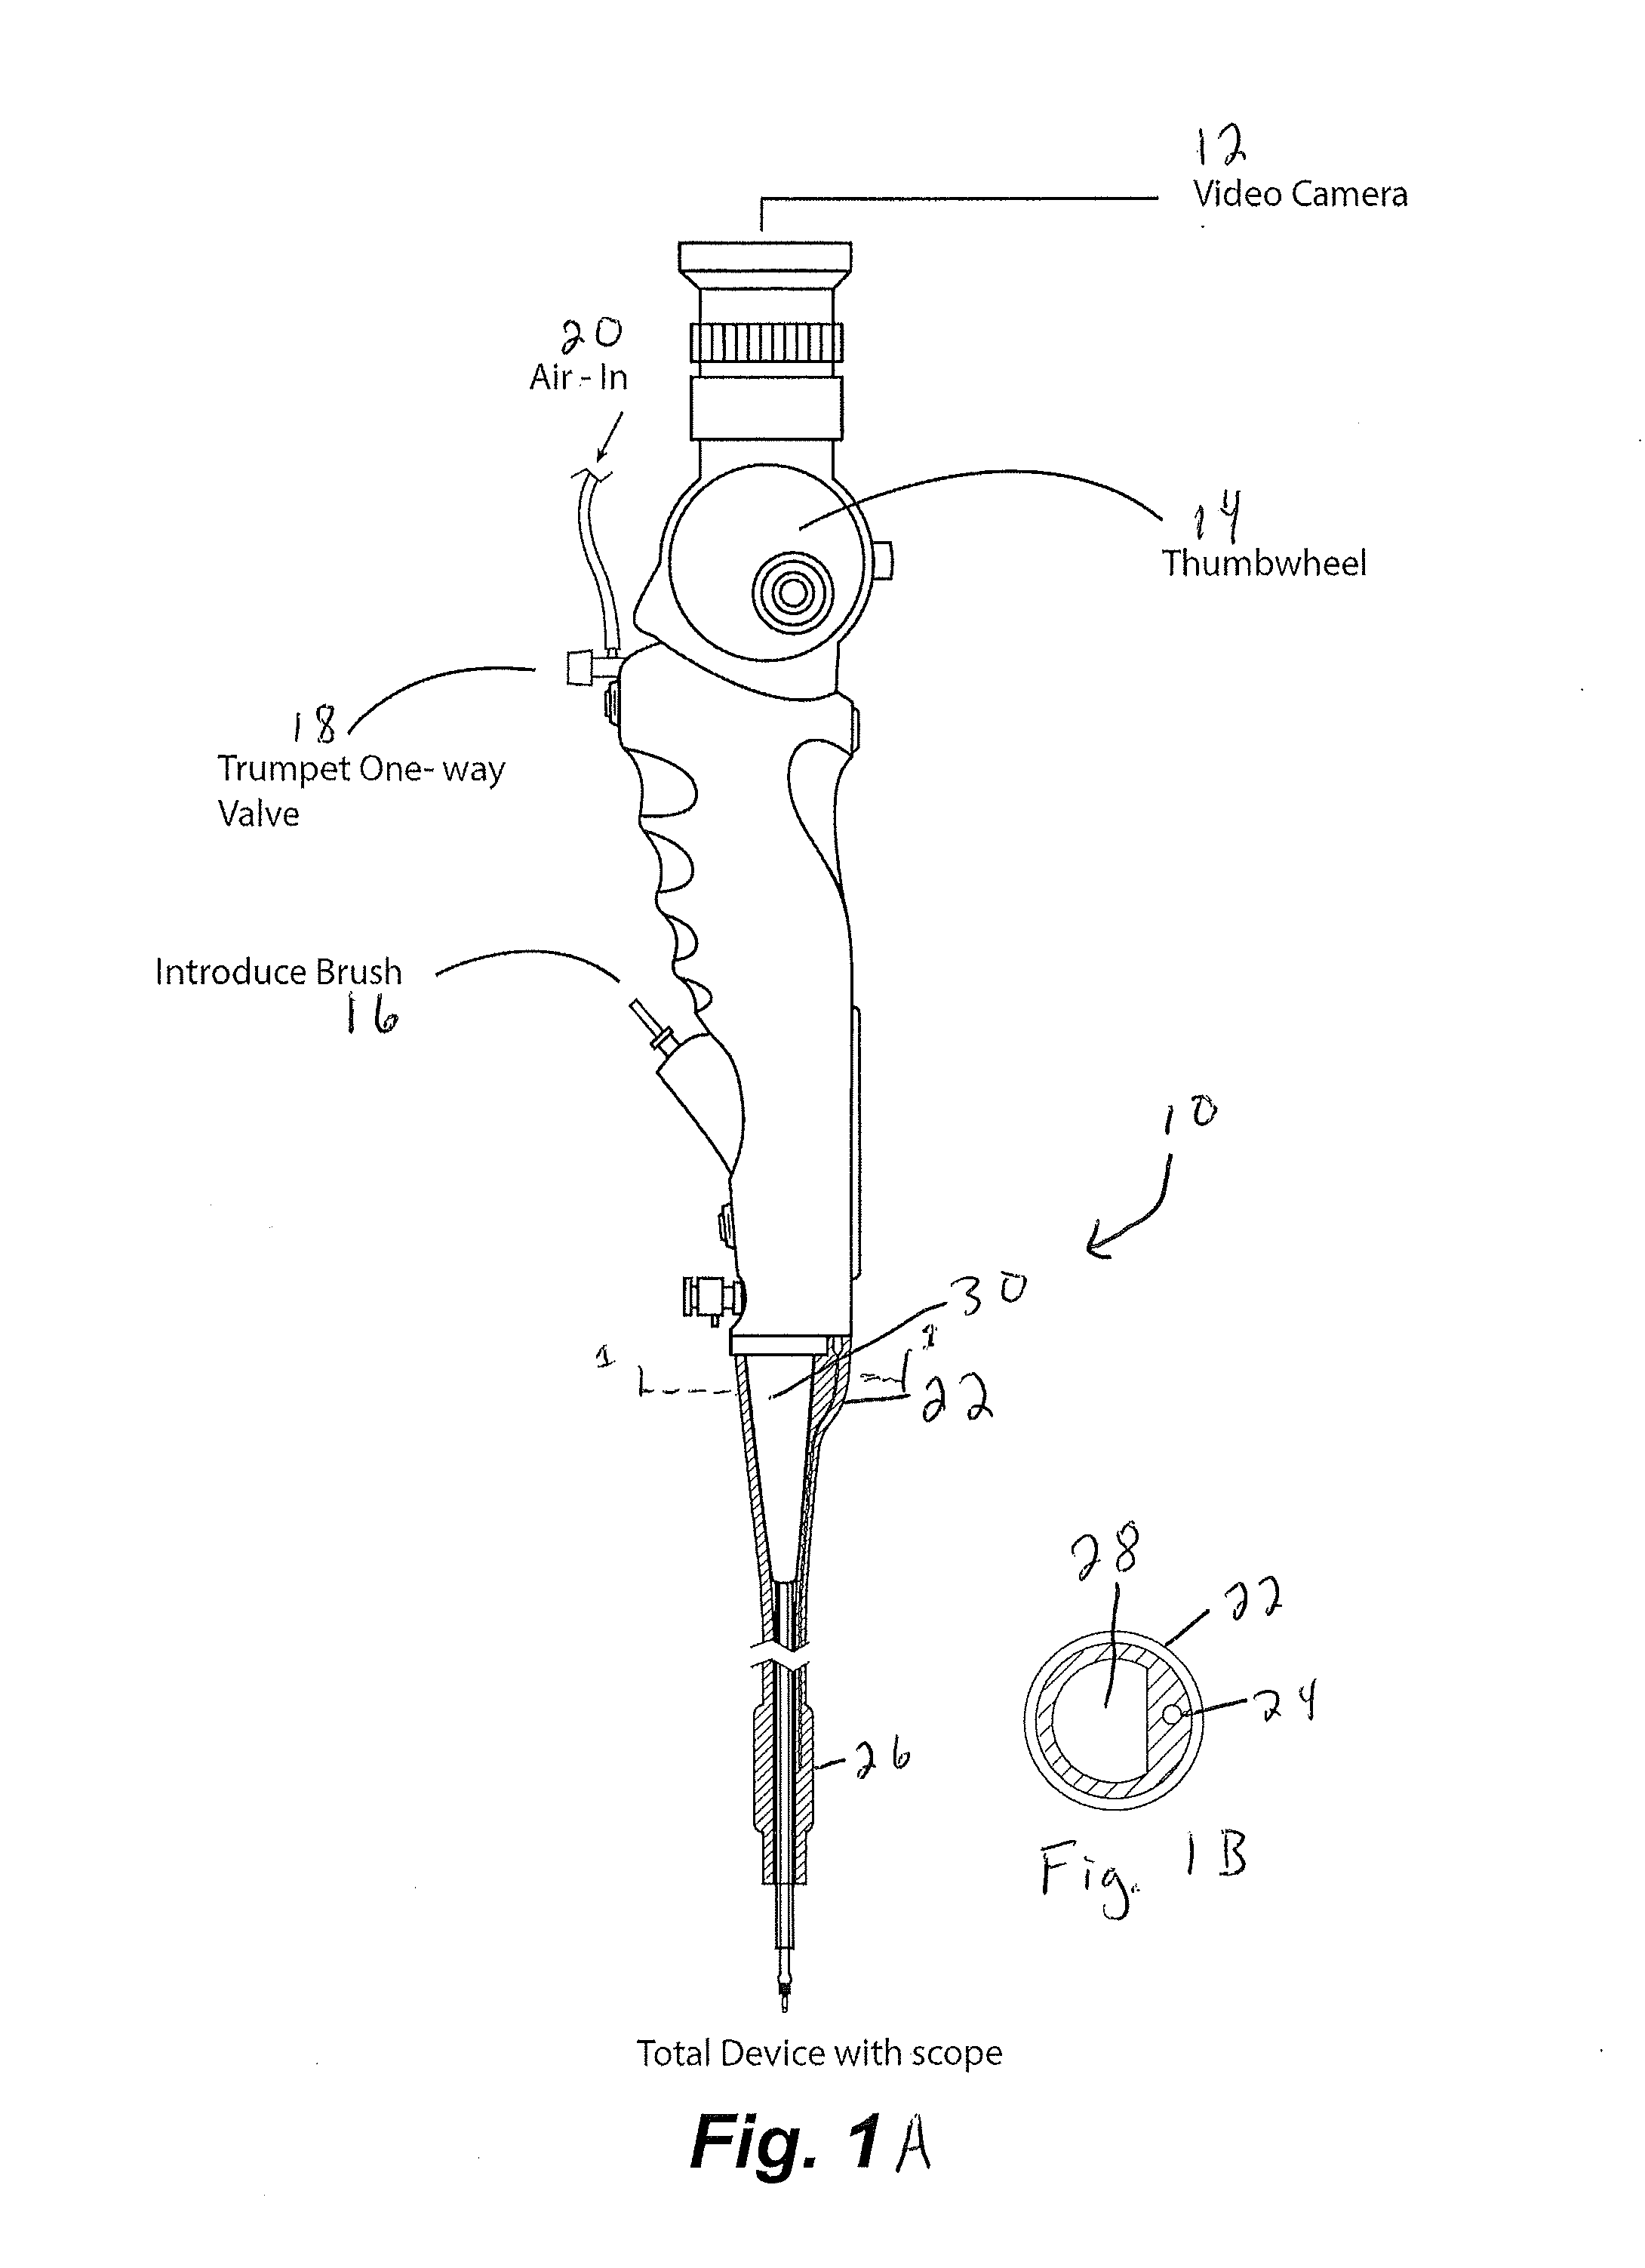 Apparatus and method for ovarian cancer screening